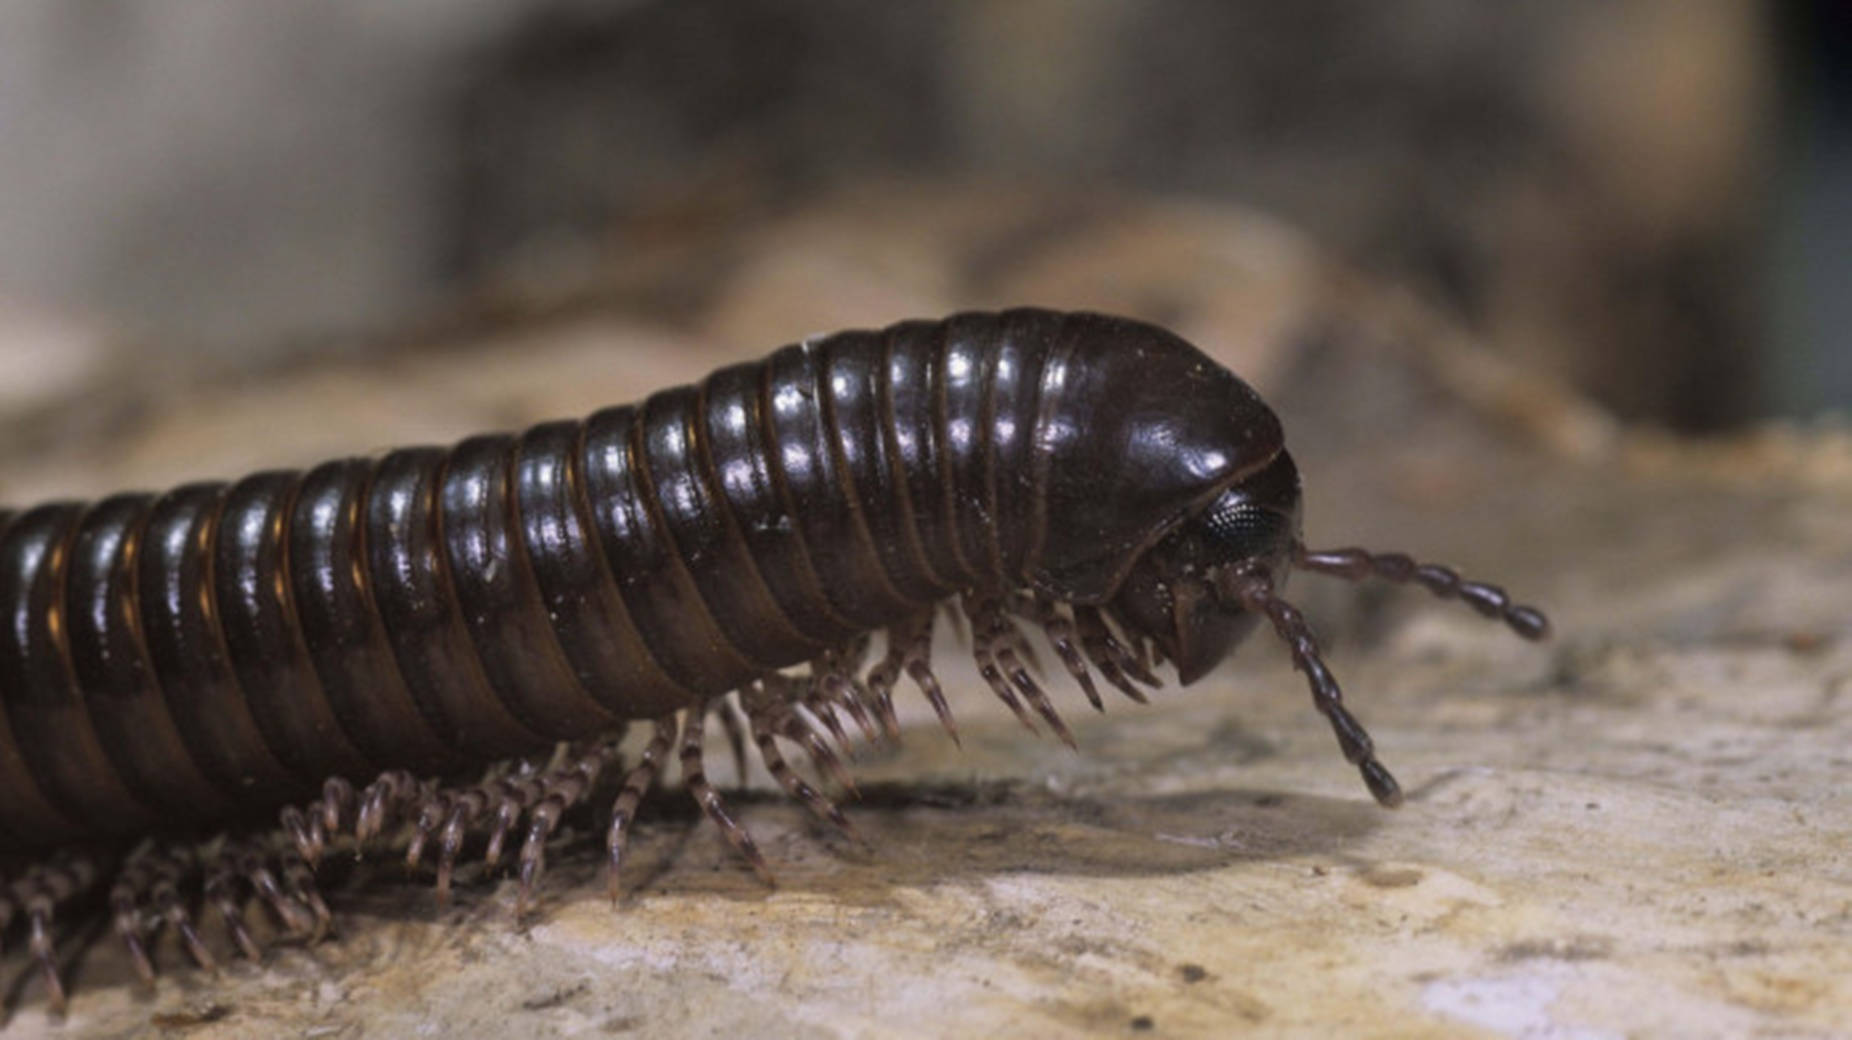 Centipede Head Crawling On Ground Wallpaper